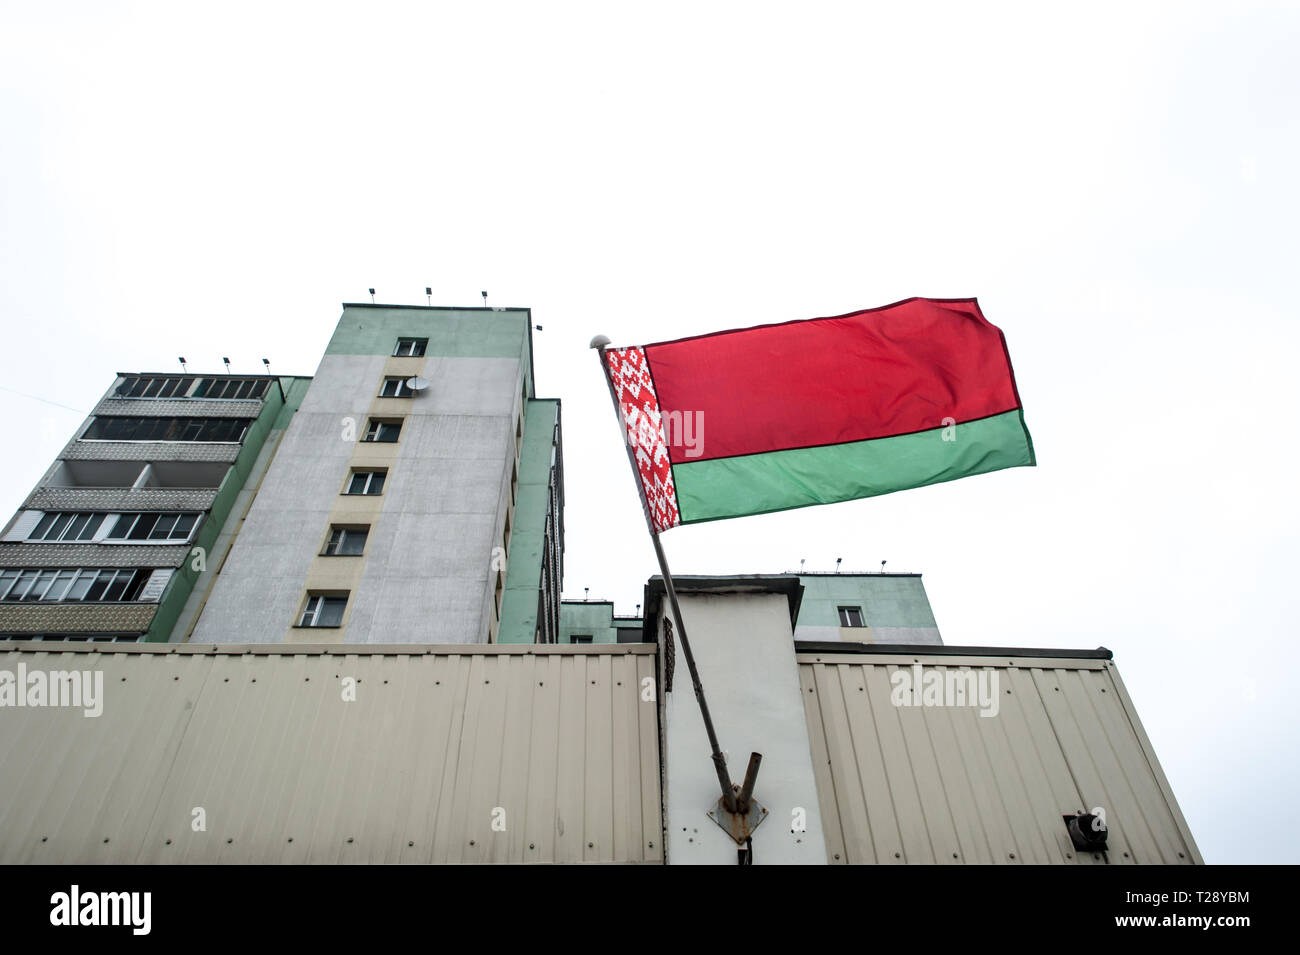 The flag of the Republic of Belarus flies on a building in Minsk. Stock Photo